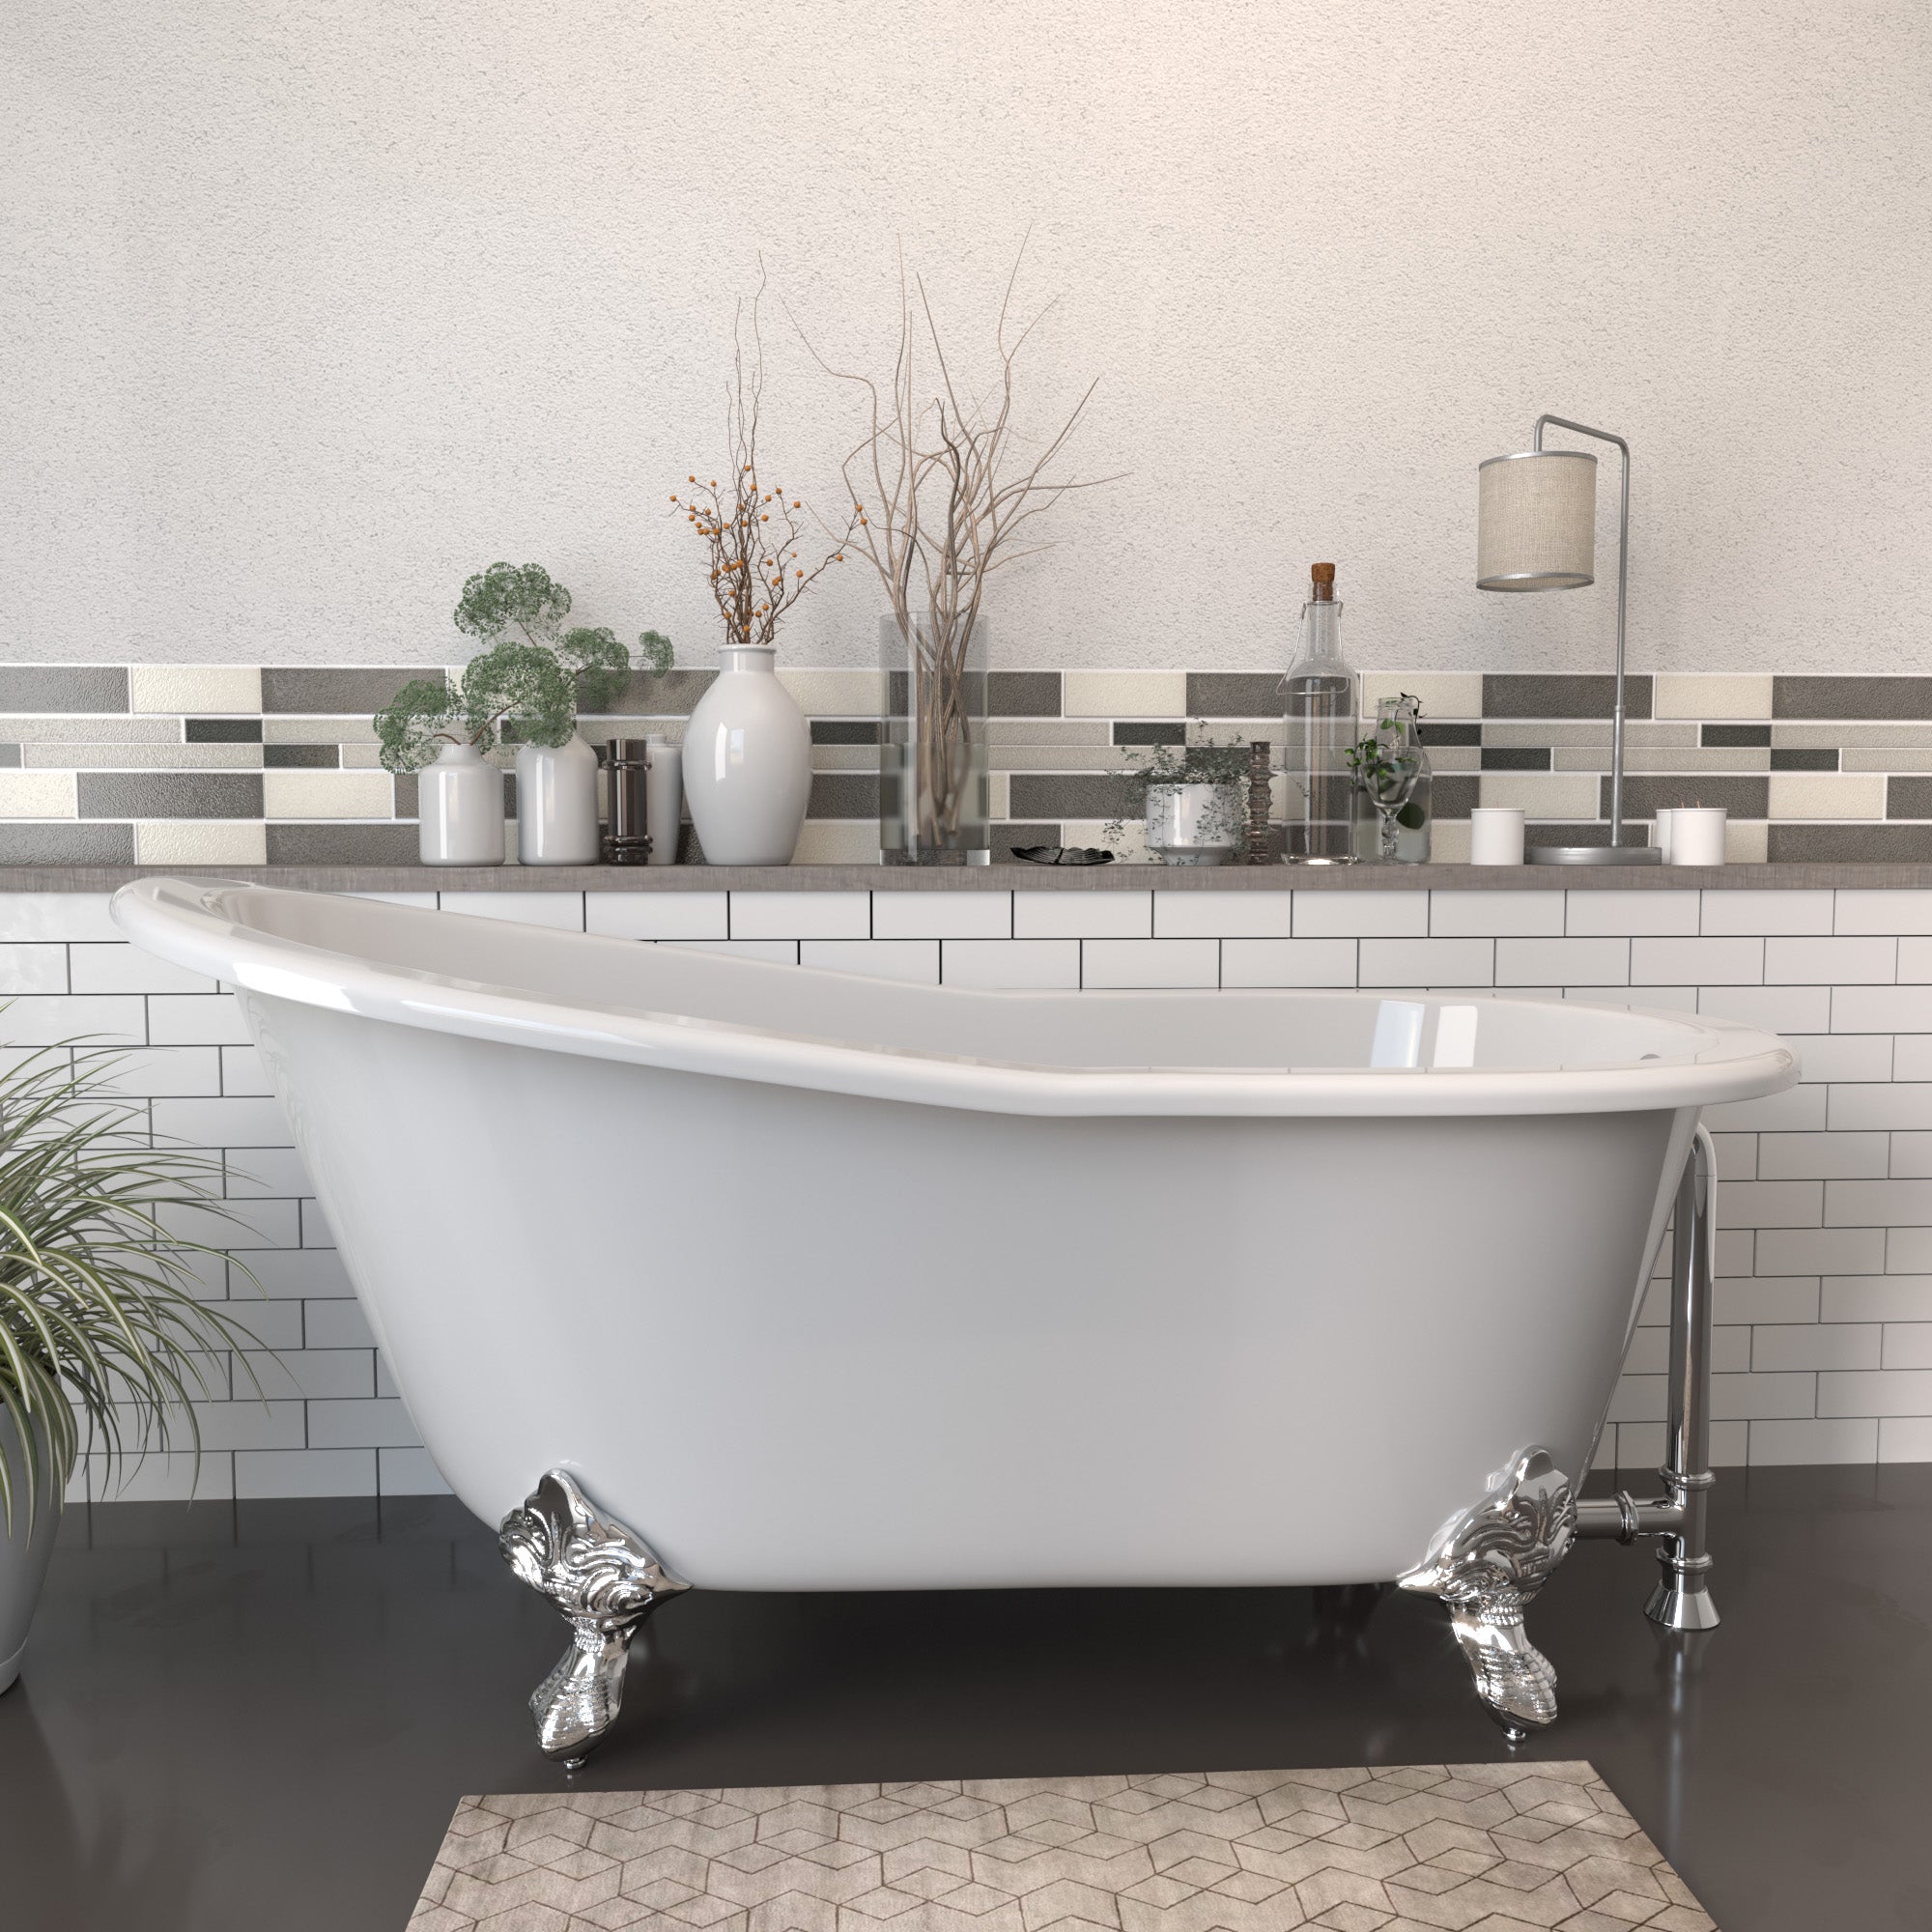 Cambridge Plumbing Cast Iron Slipper Clawfoot Tub (Porcelain enamel interior and white paint exterior) Brushed nickel ball and claw feet - Lifestyle - 61" X 30" ST61-NH - Vital Hydrotherapy